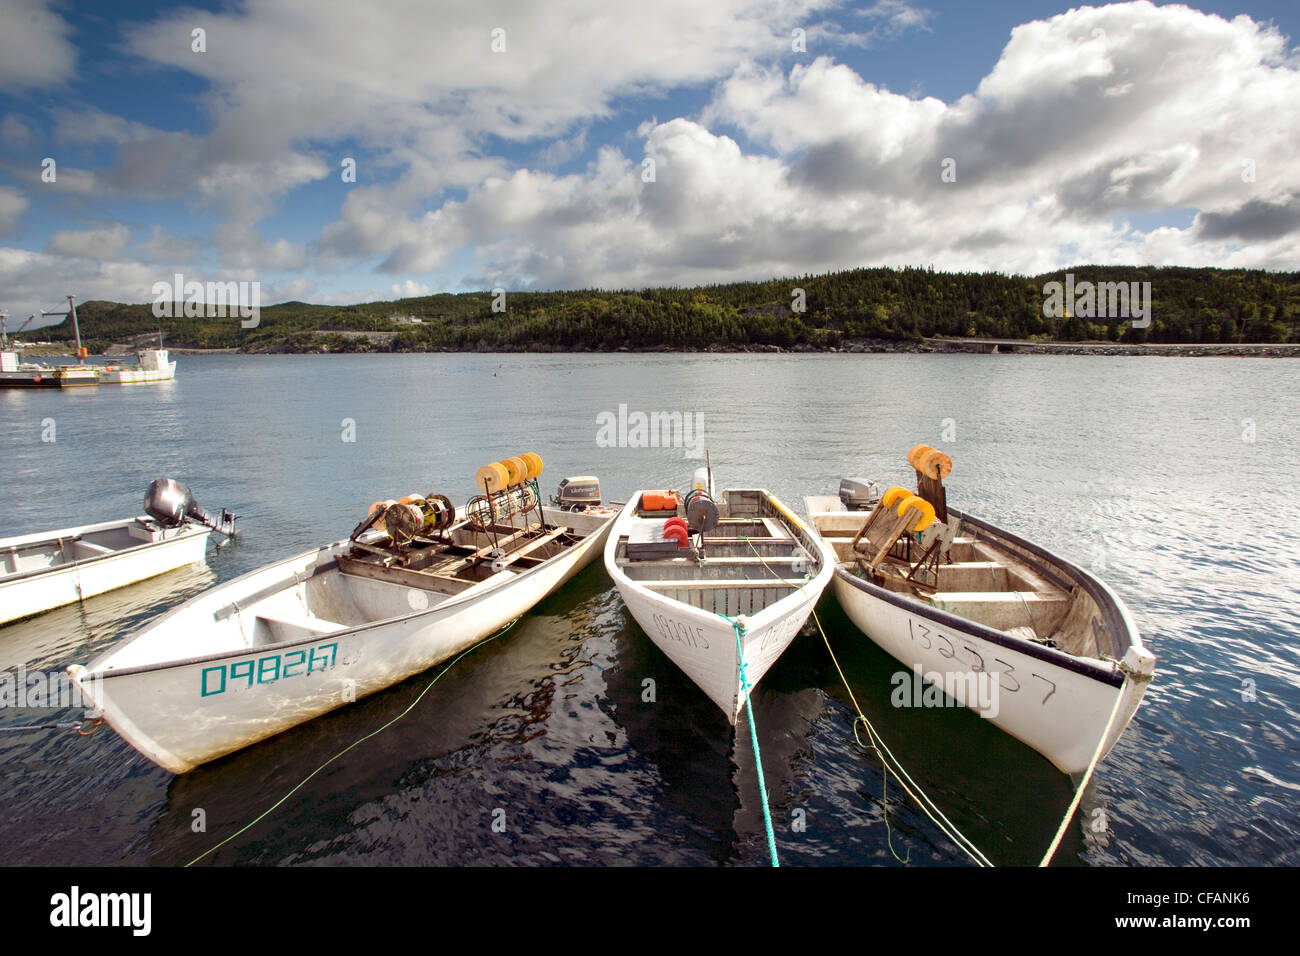 Boats tied up in Plate West Cove, Newfoundland and Labrador, Canada. Stock Photo